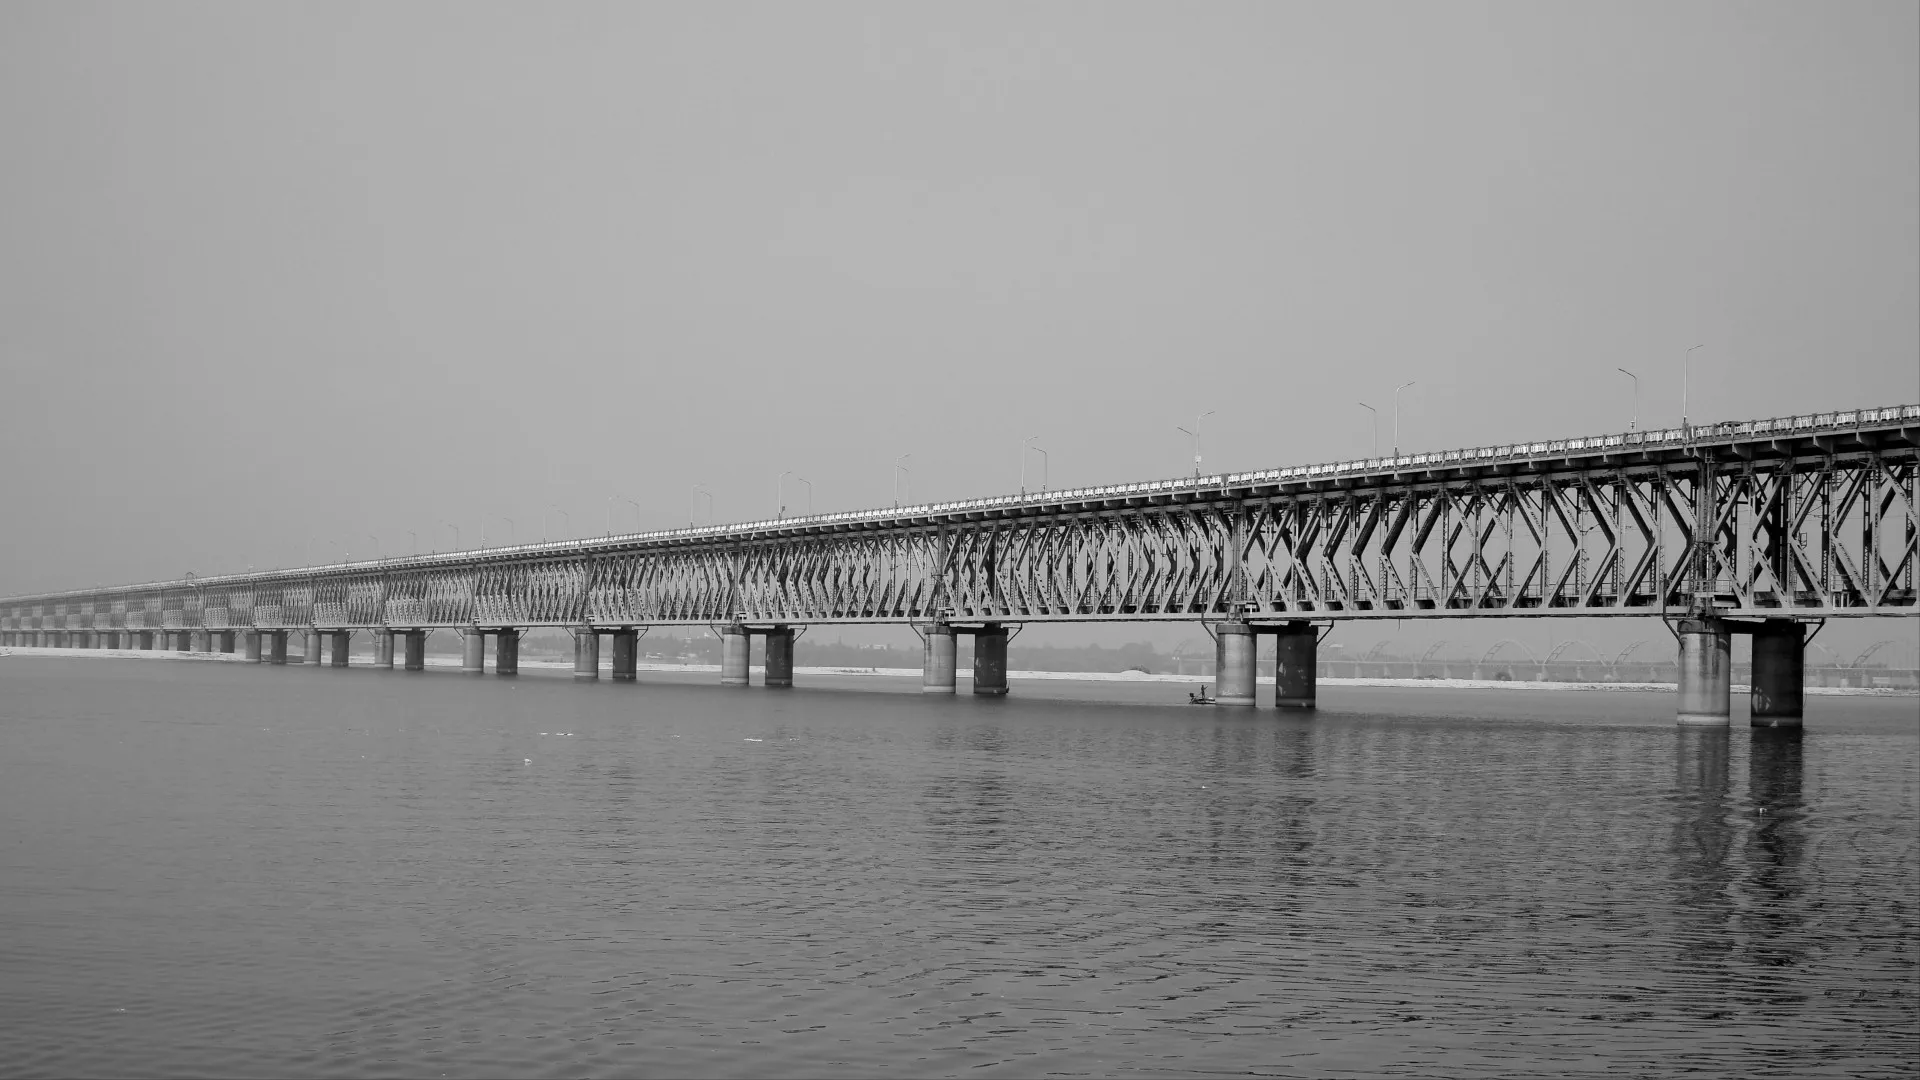 A railway bridge over a large body of water